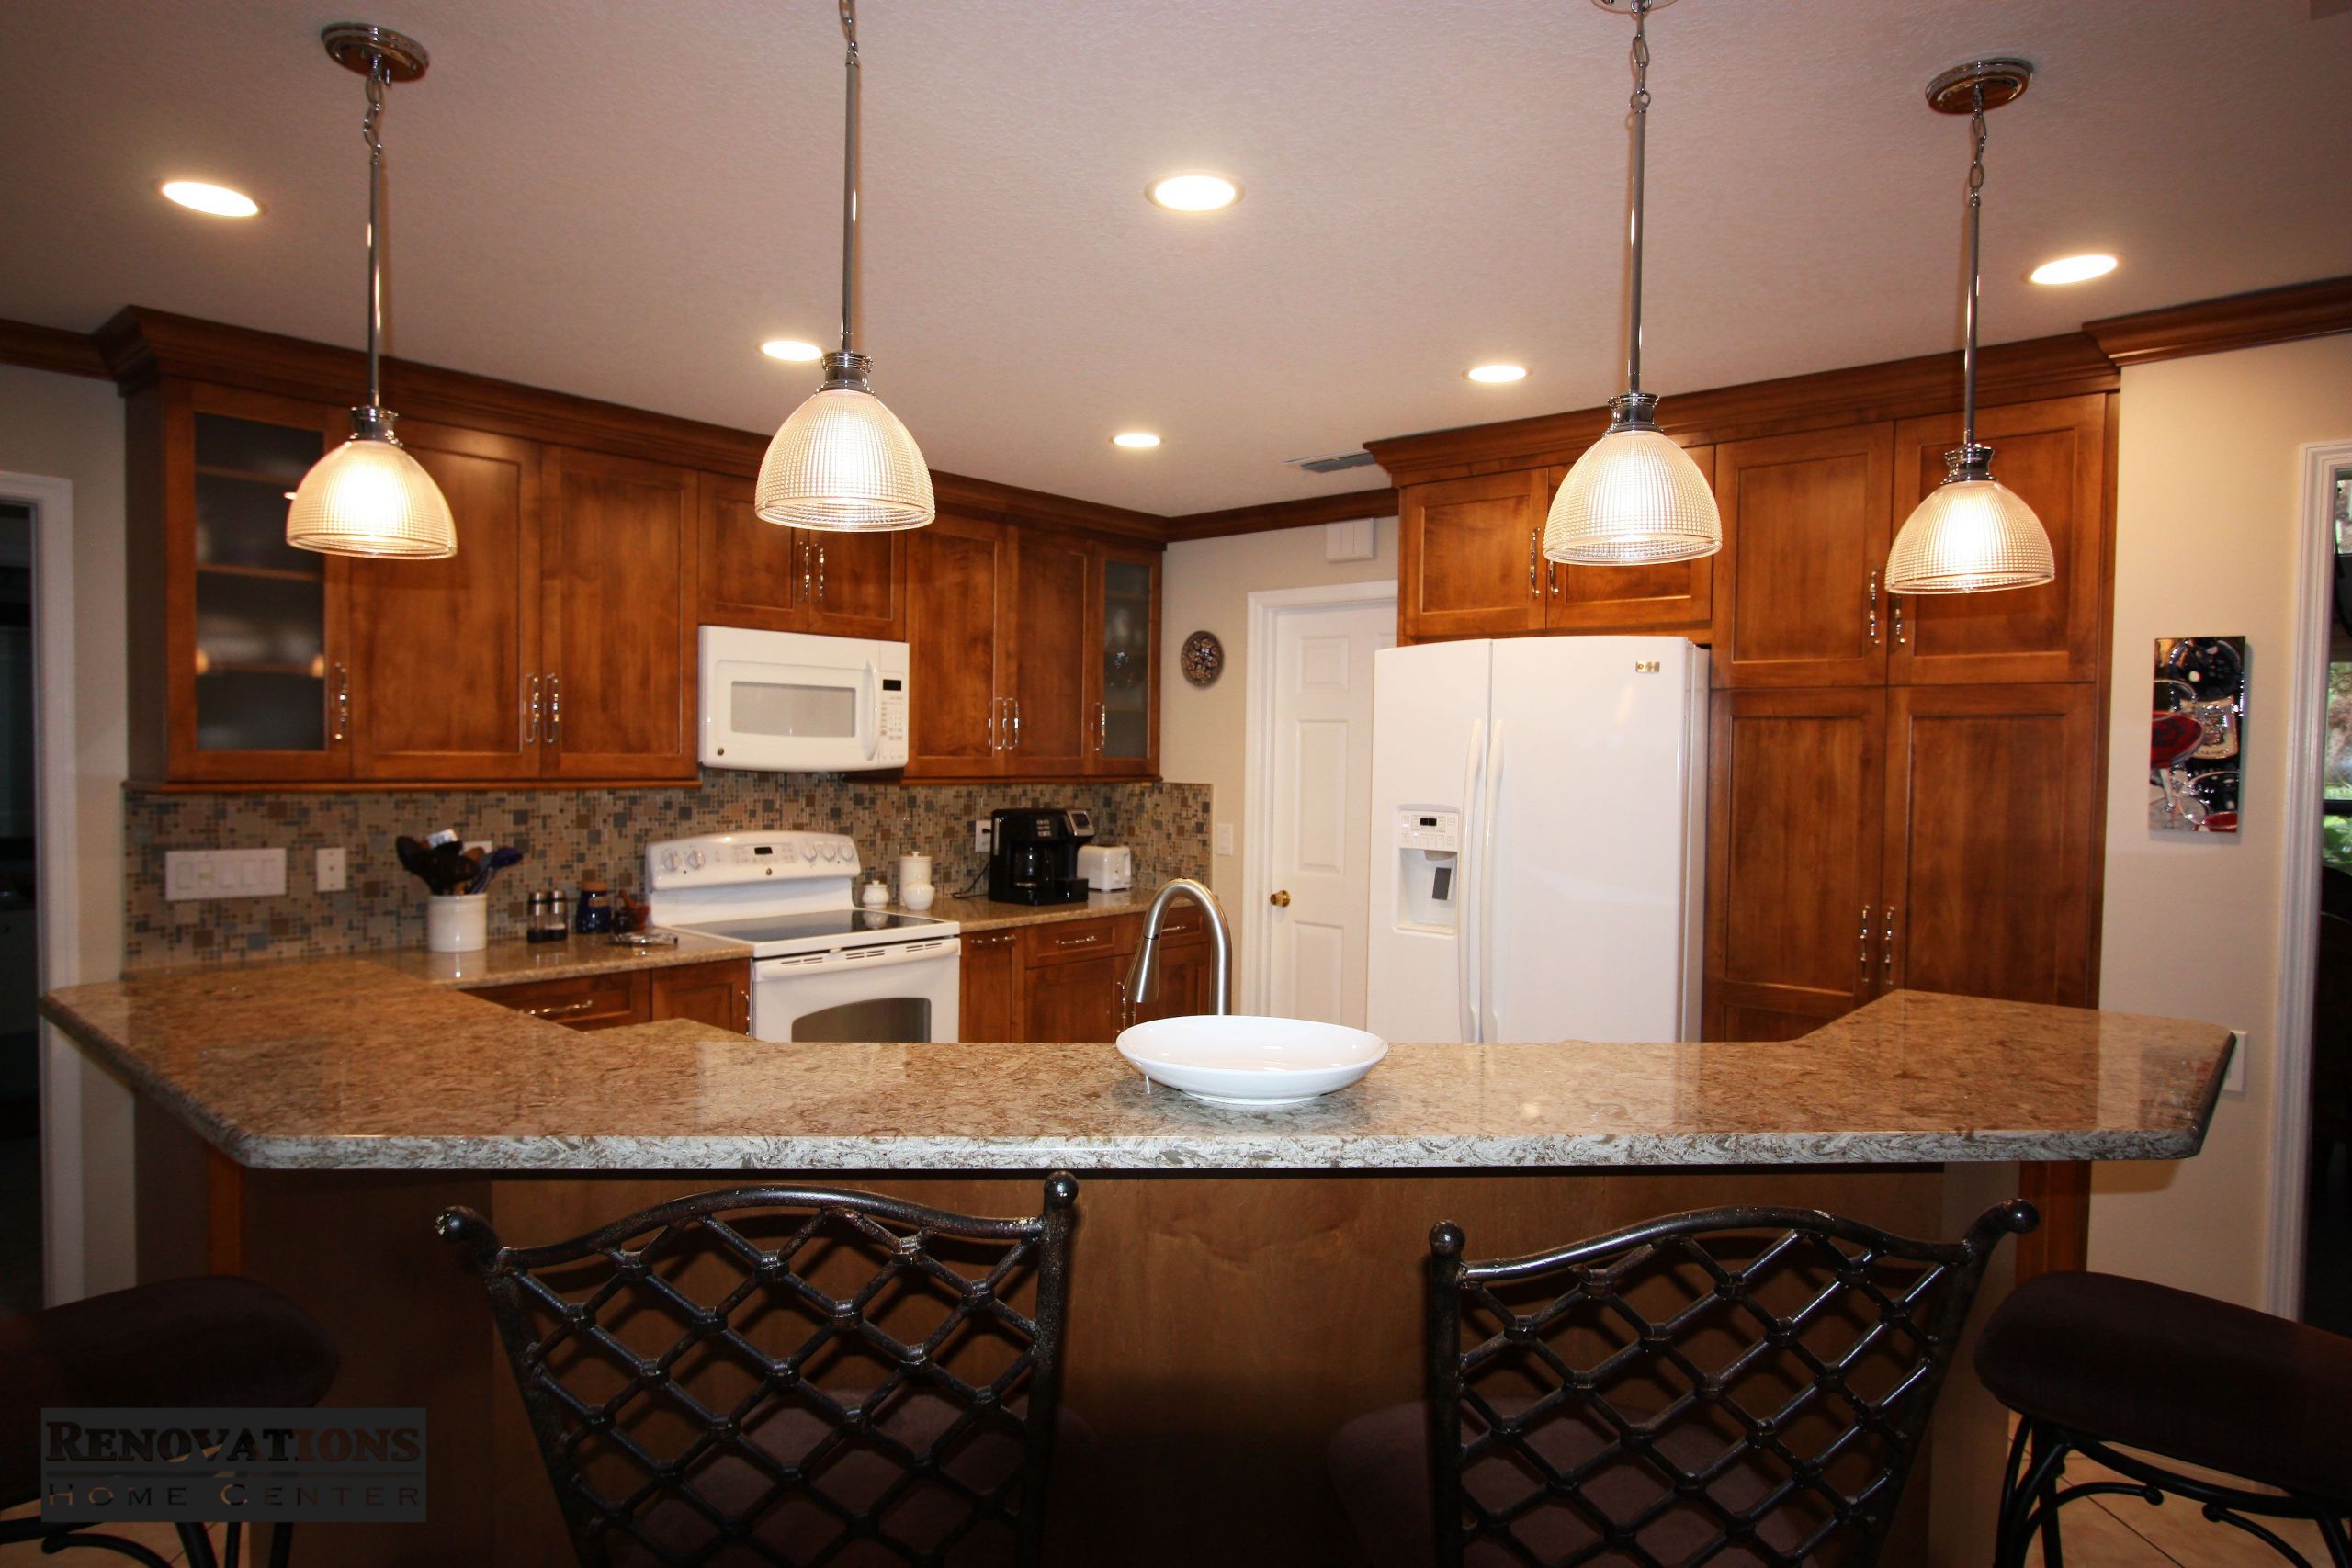 Kitchen And Bath Remodeling Contractors
 Our client in Palm Harbor wanted to refresh their kitchen